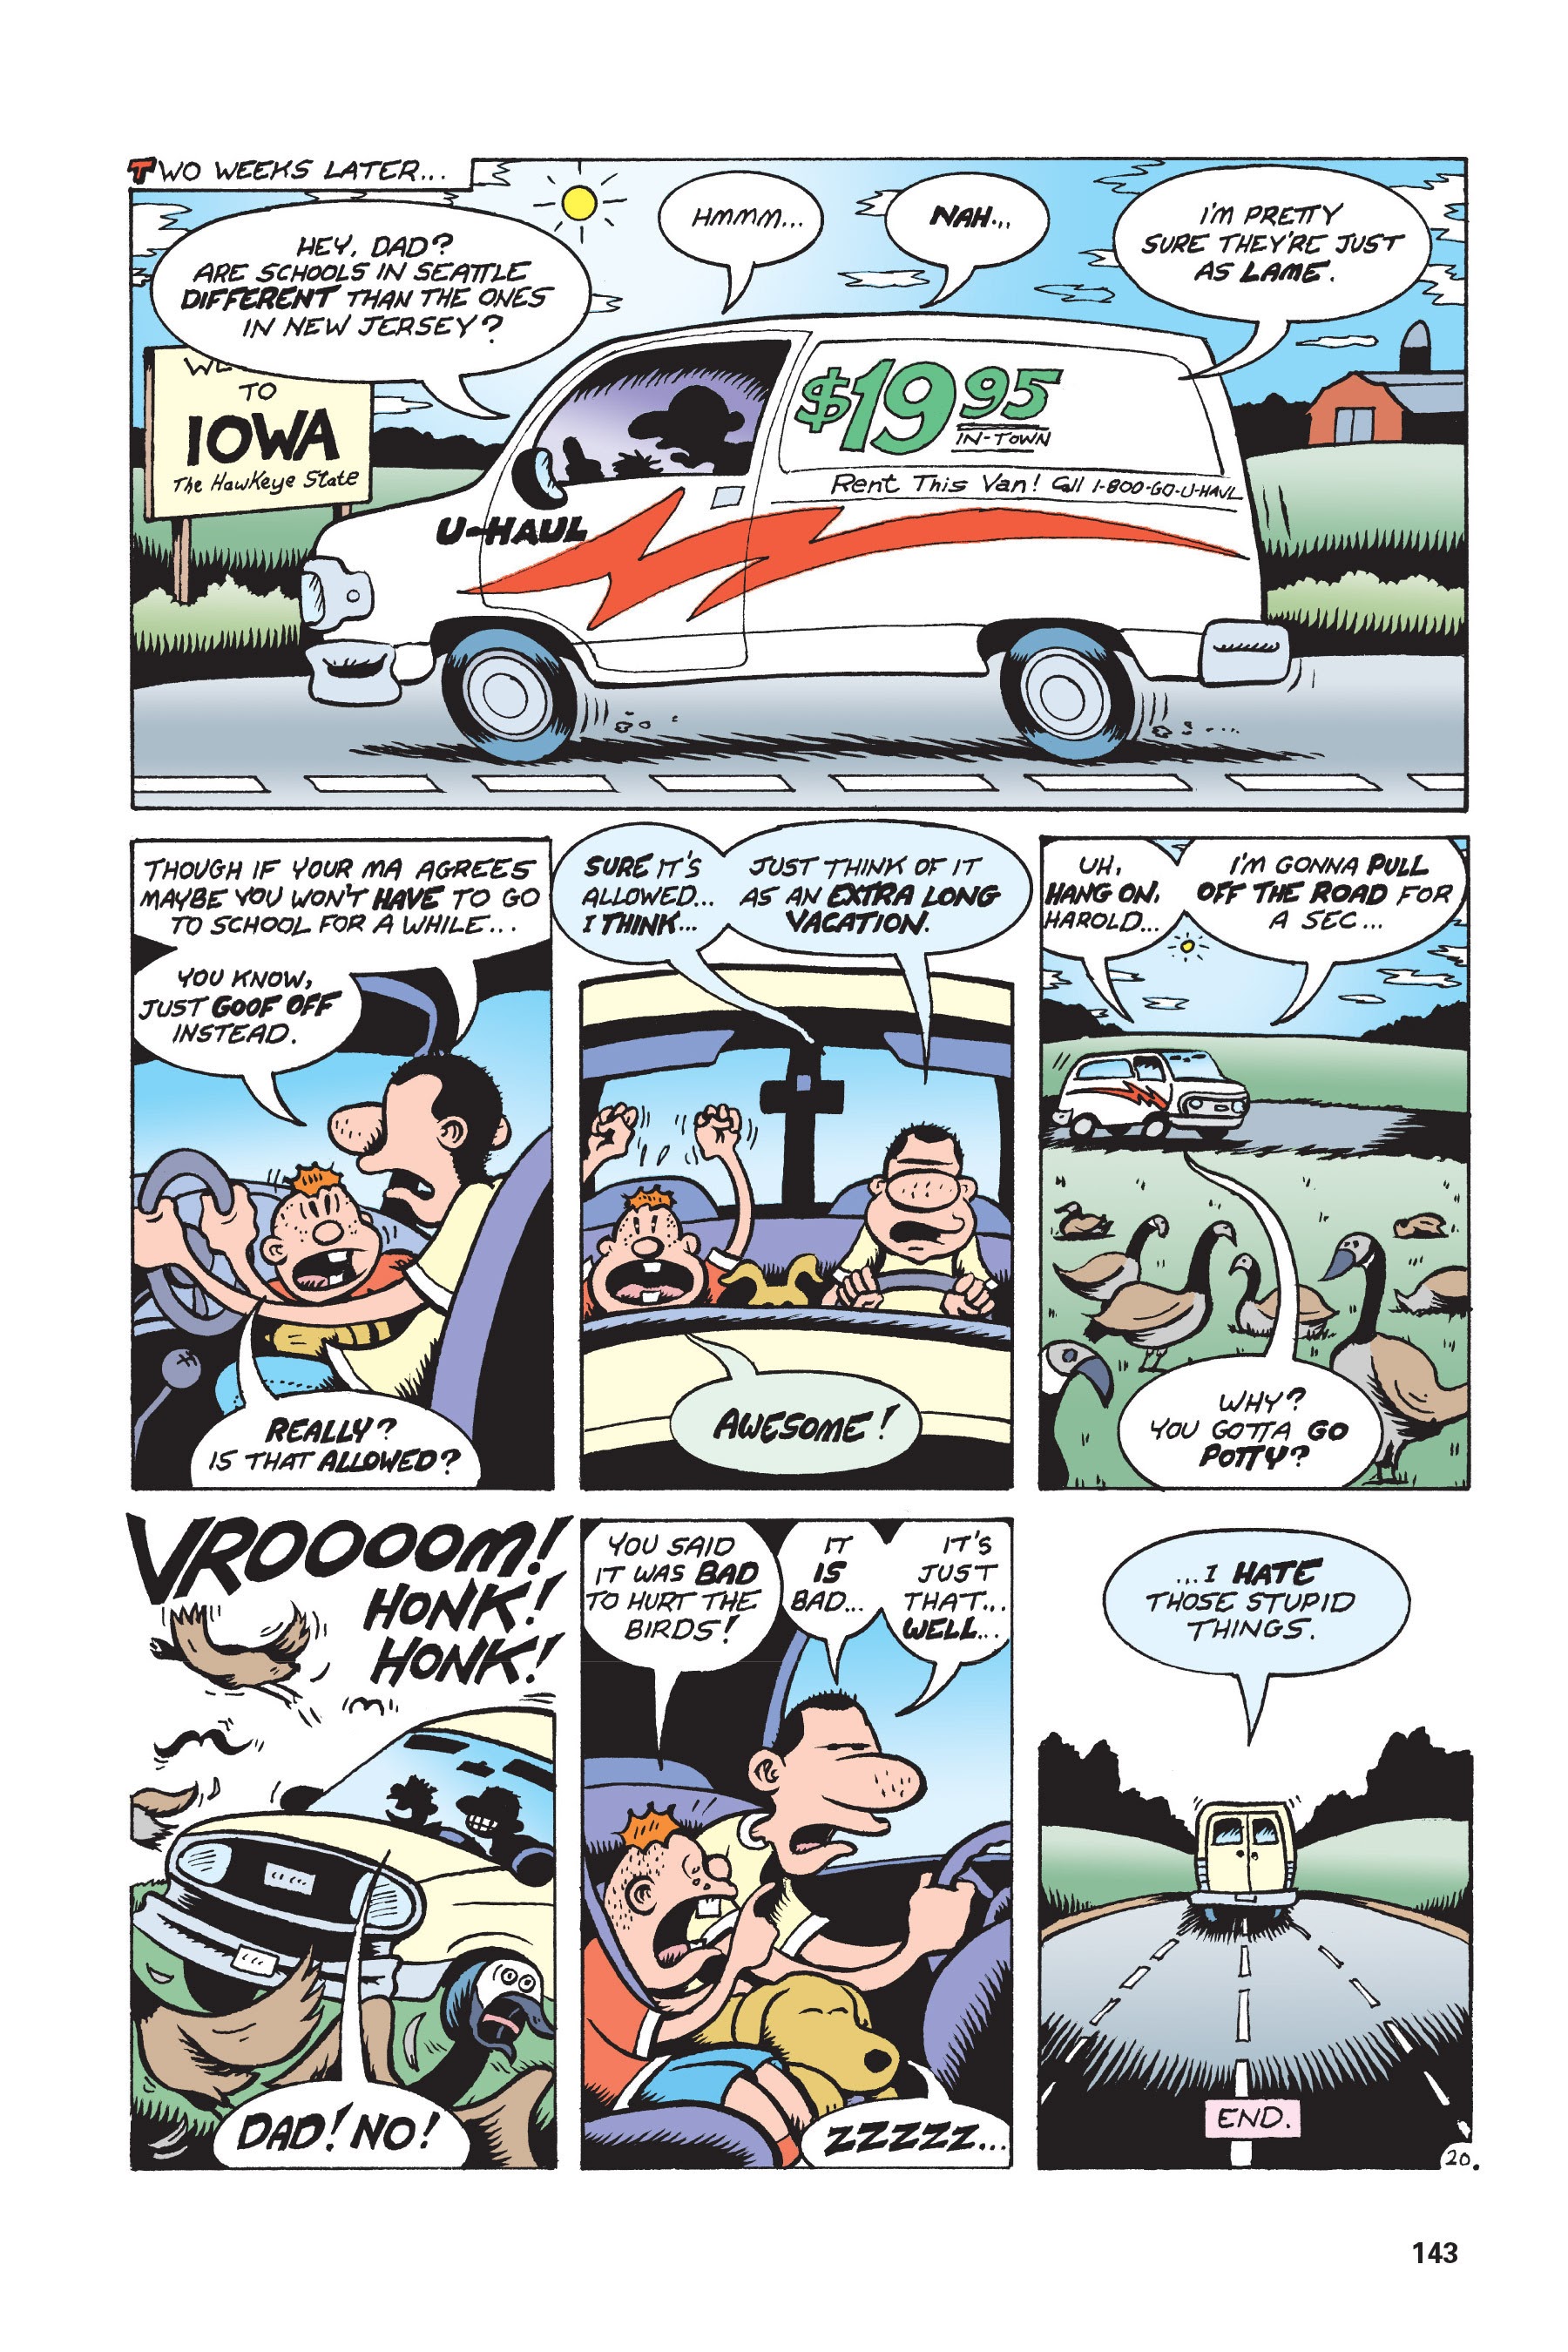 Read online Buddy Buys a Dump comic -  Issue # TPB - 143